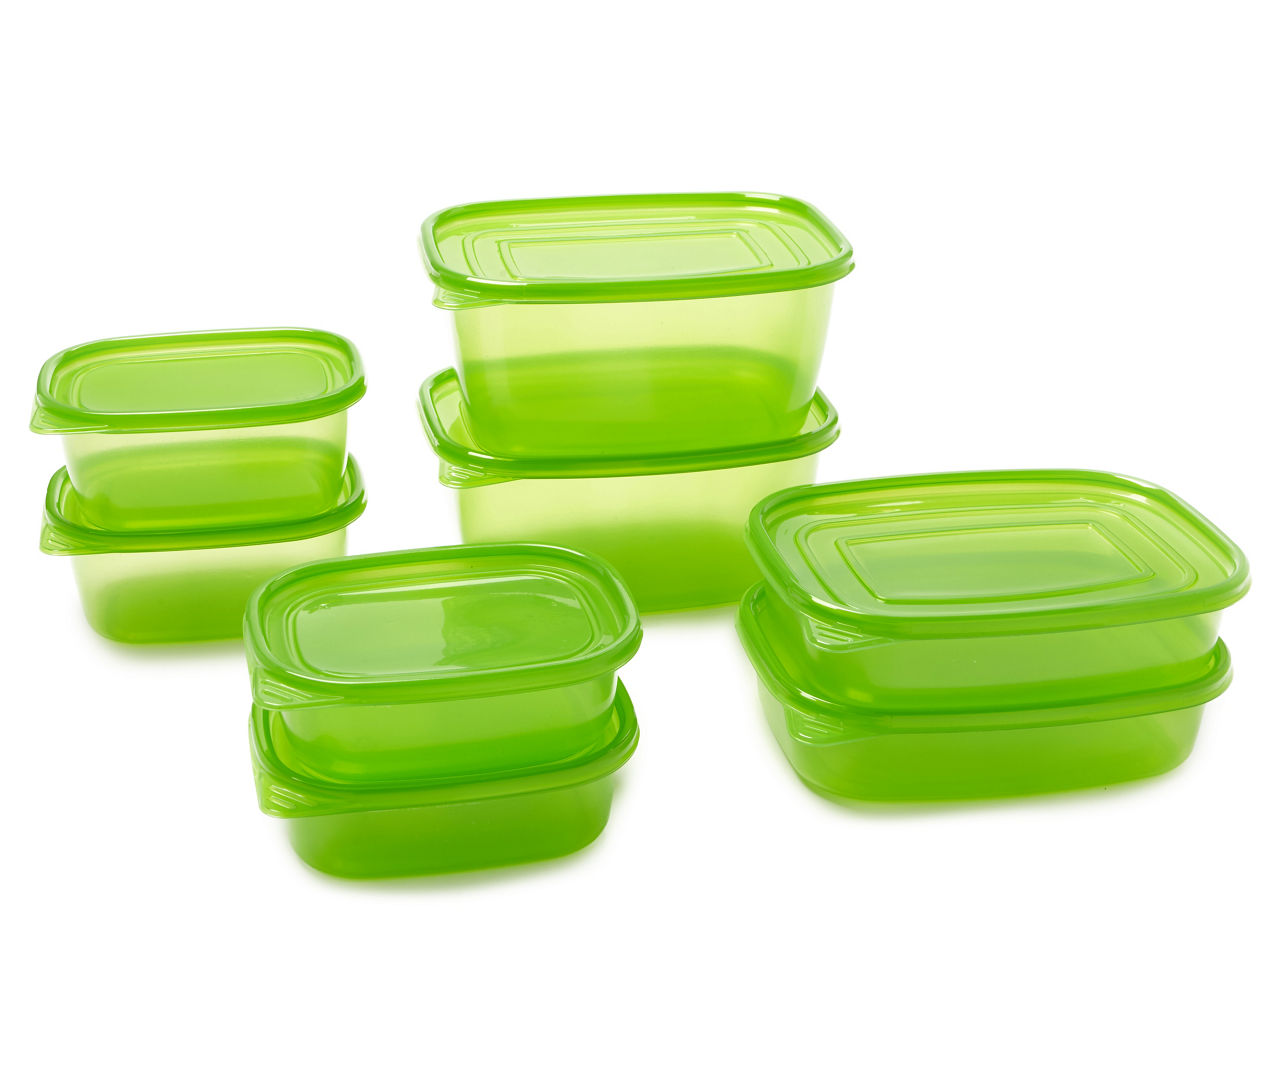 Keep Your Food Fresh Longer with Debbie Meyer's GreenBoxes